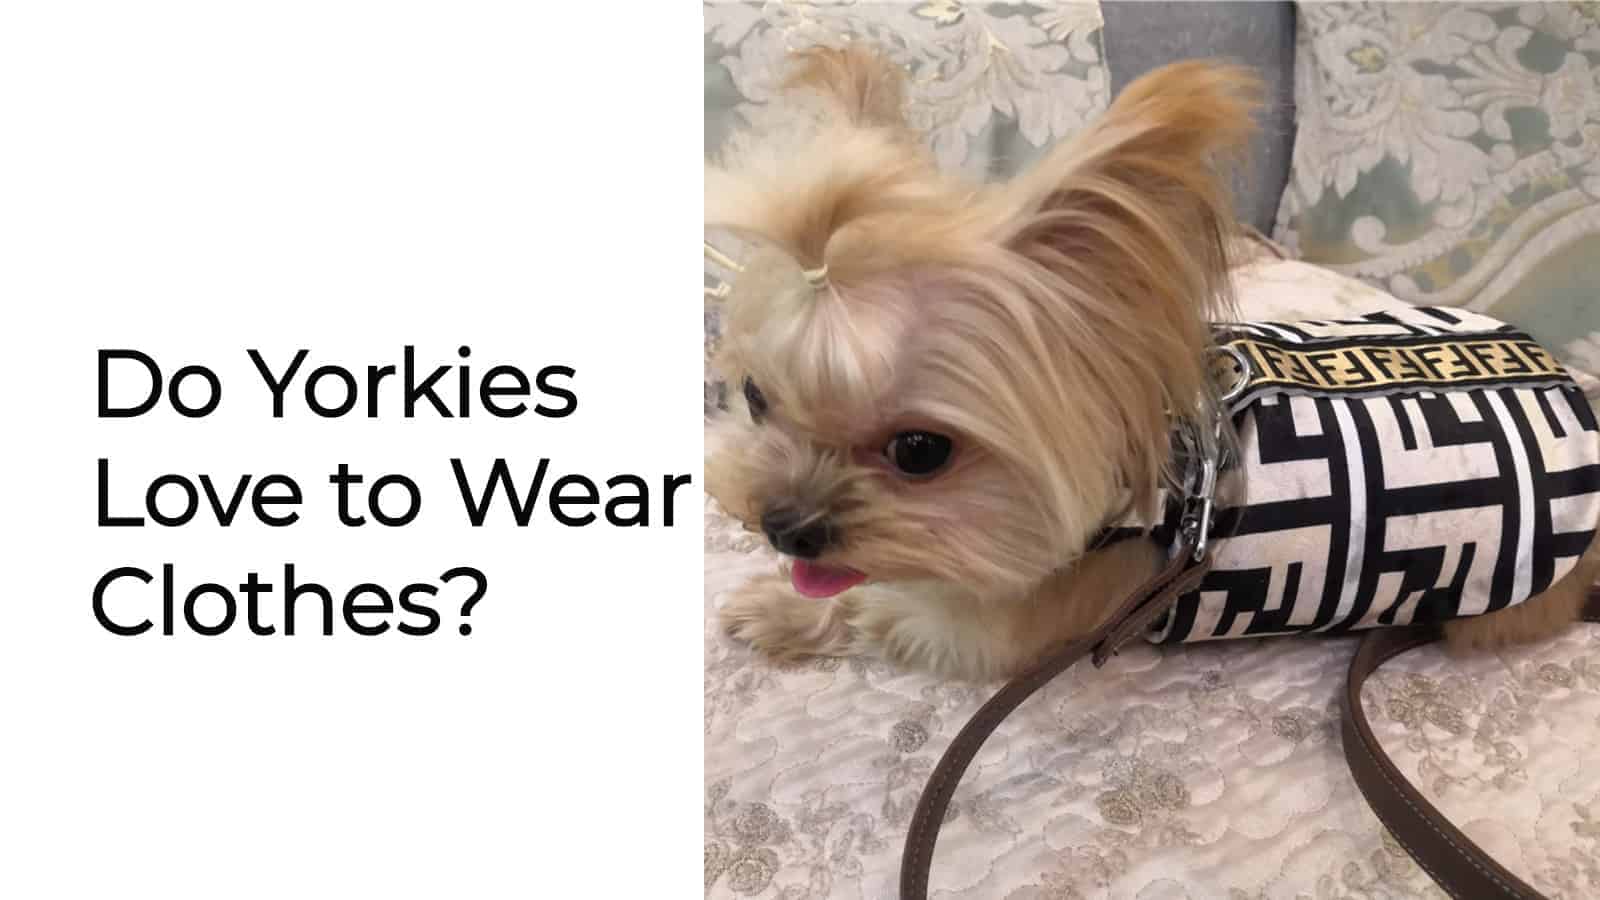 Do Yorkies Love to Wear Clothes? • Do Yorkies Love to Wear Clothes?